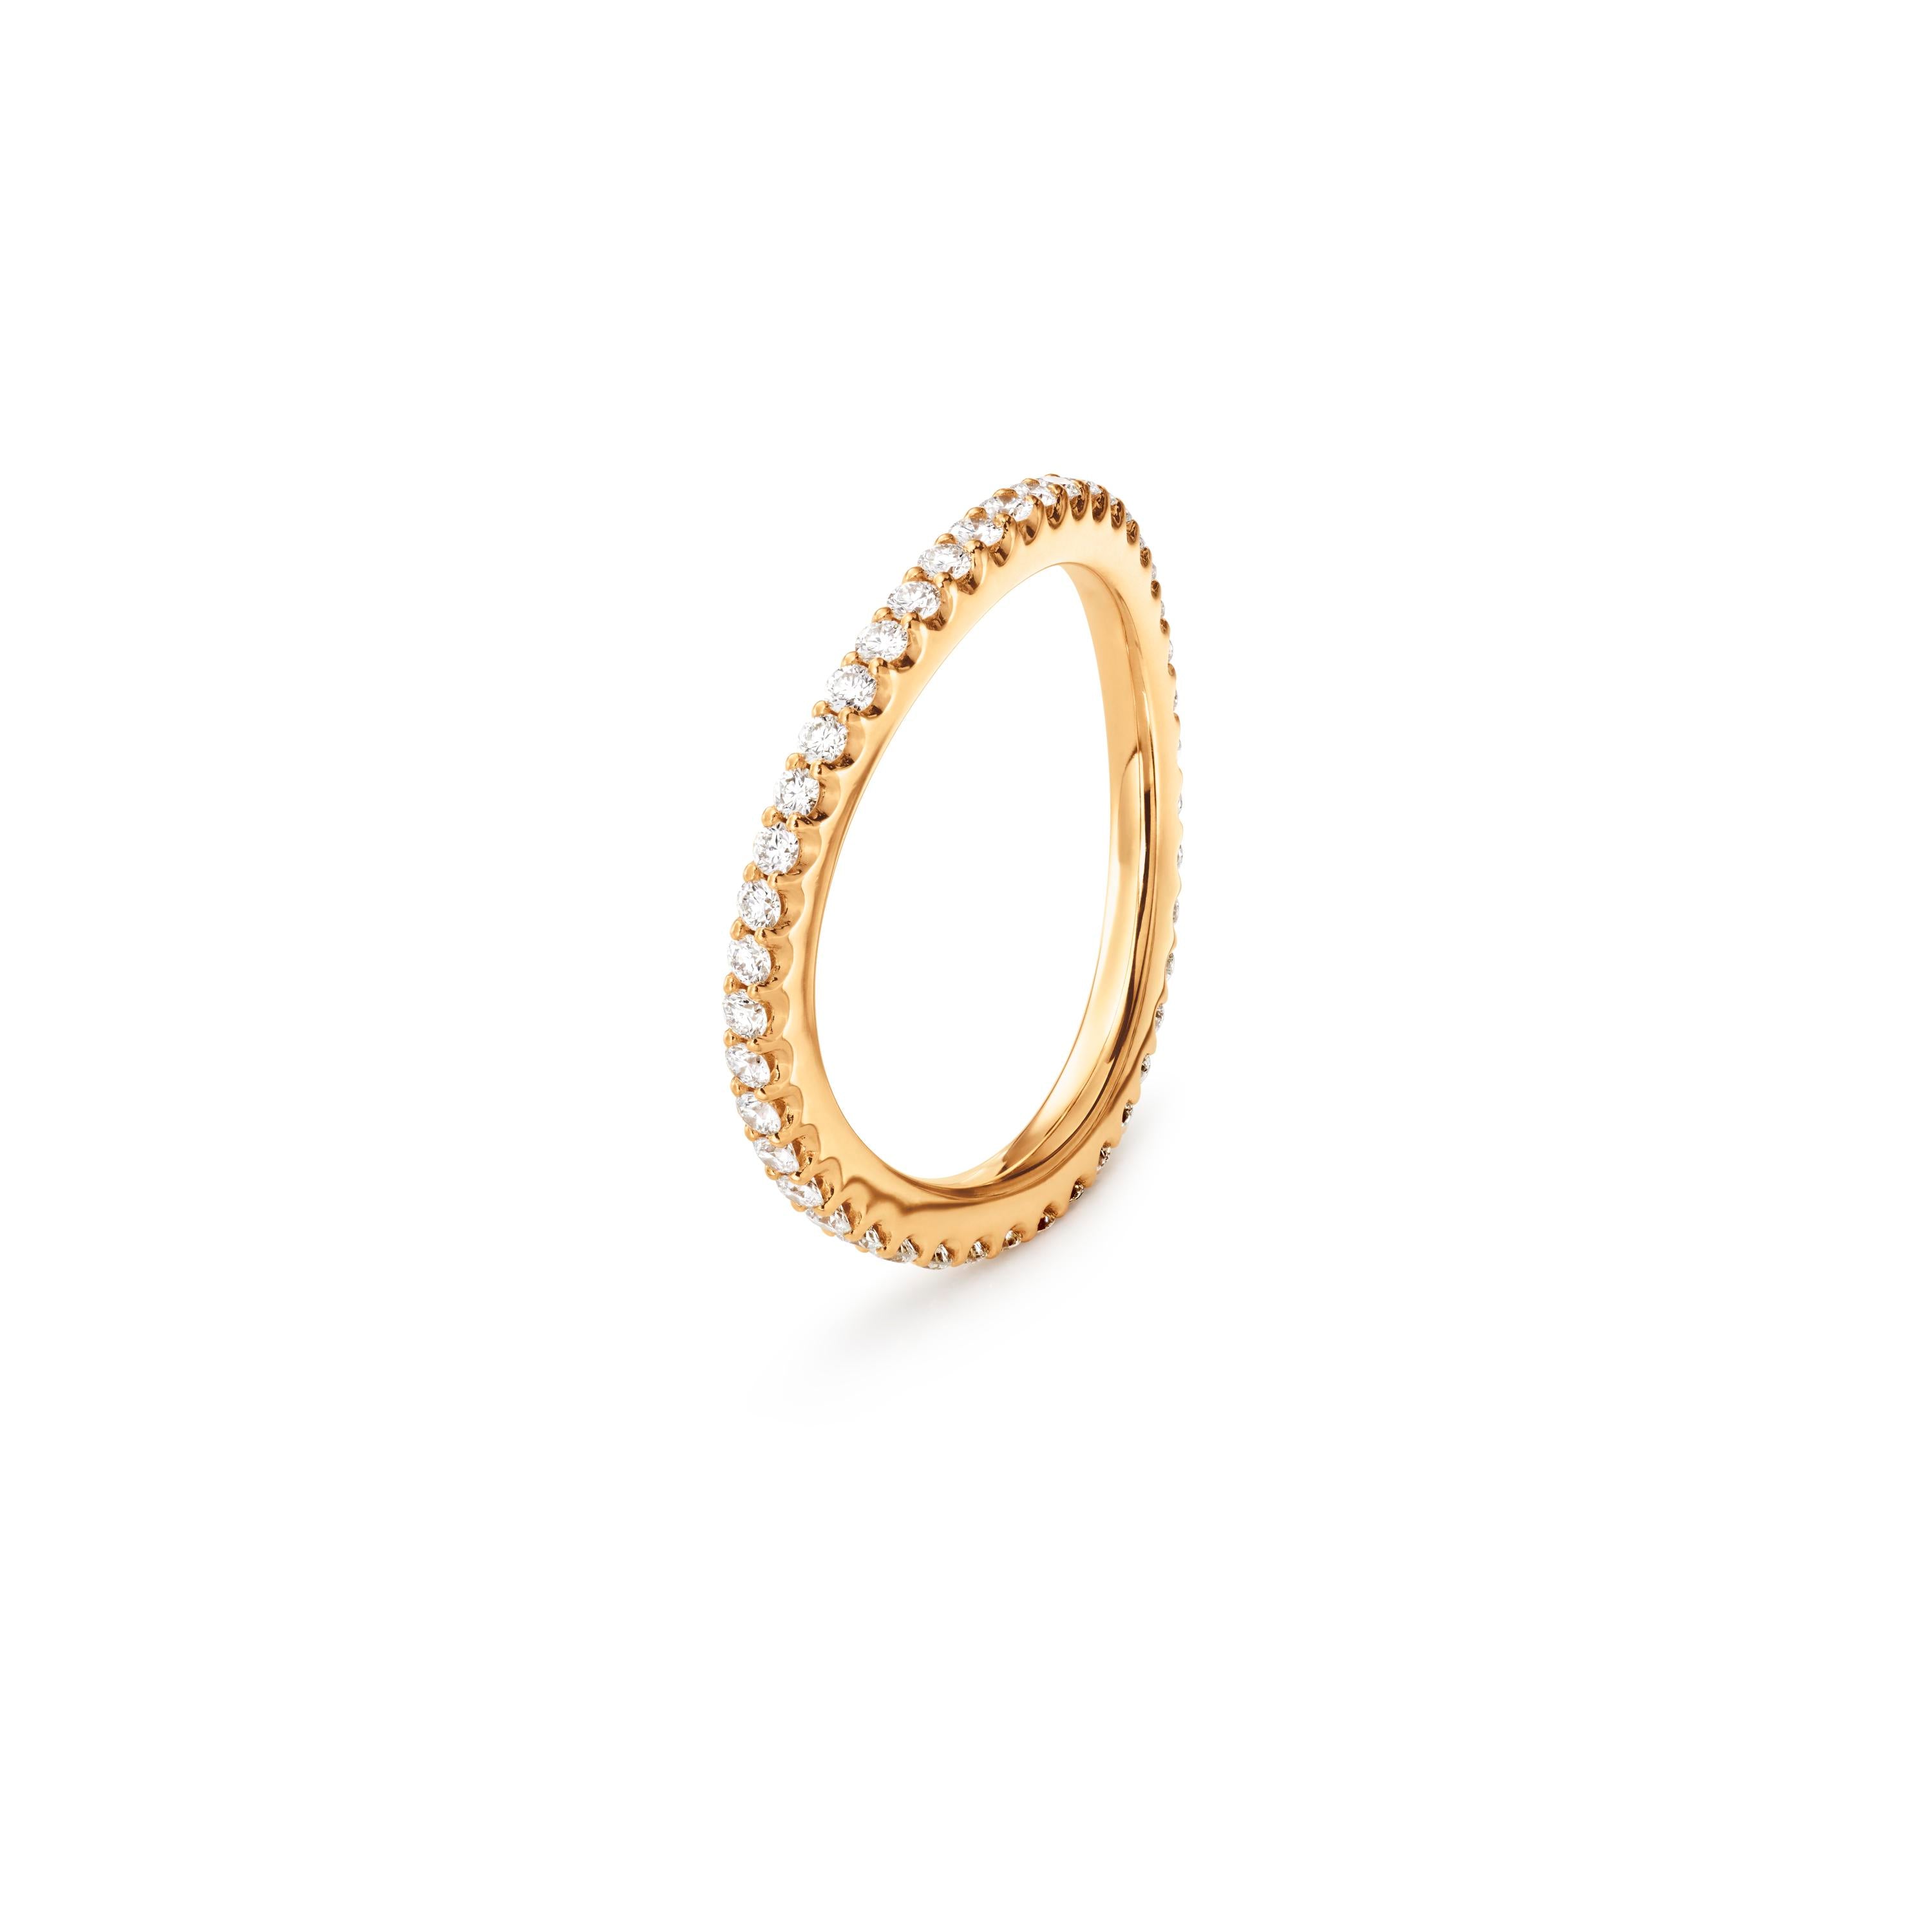 Ole Lynggaard Memoire-Ring Love Bands, Gelbgold, A2601-403